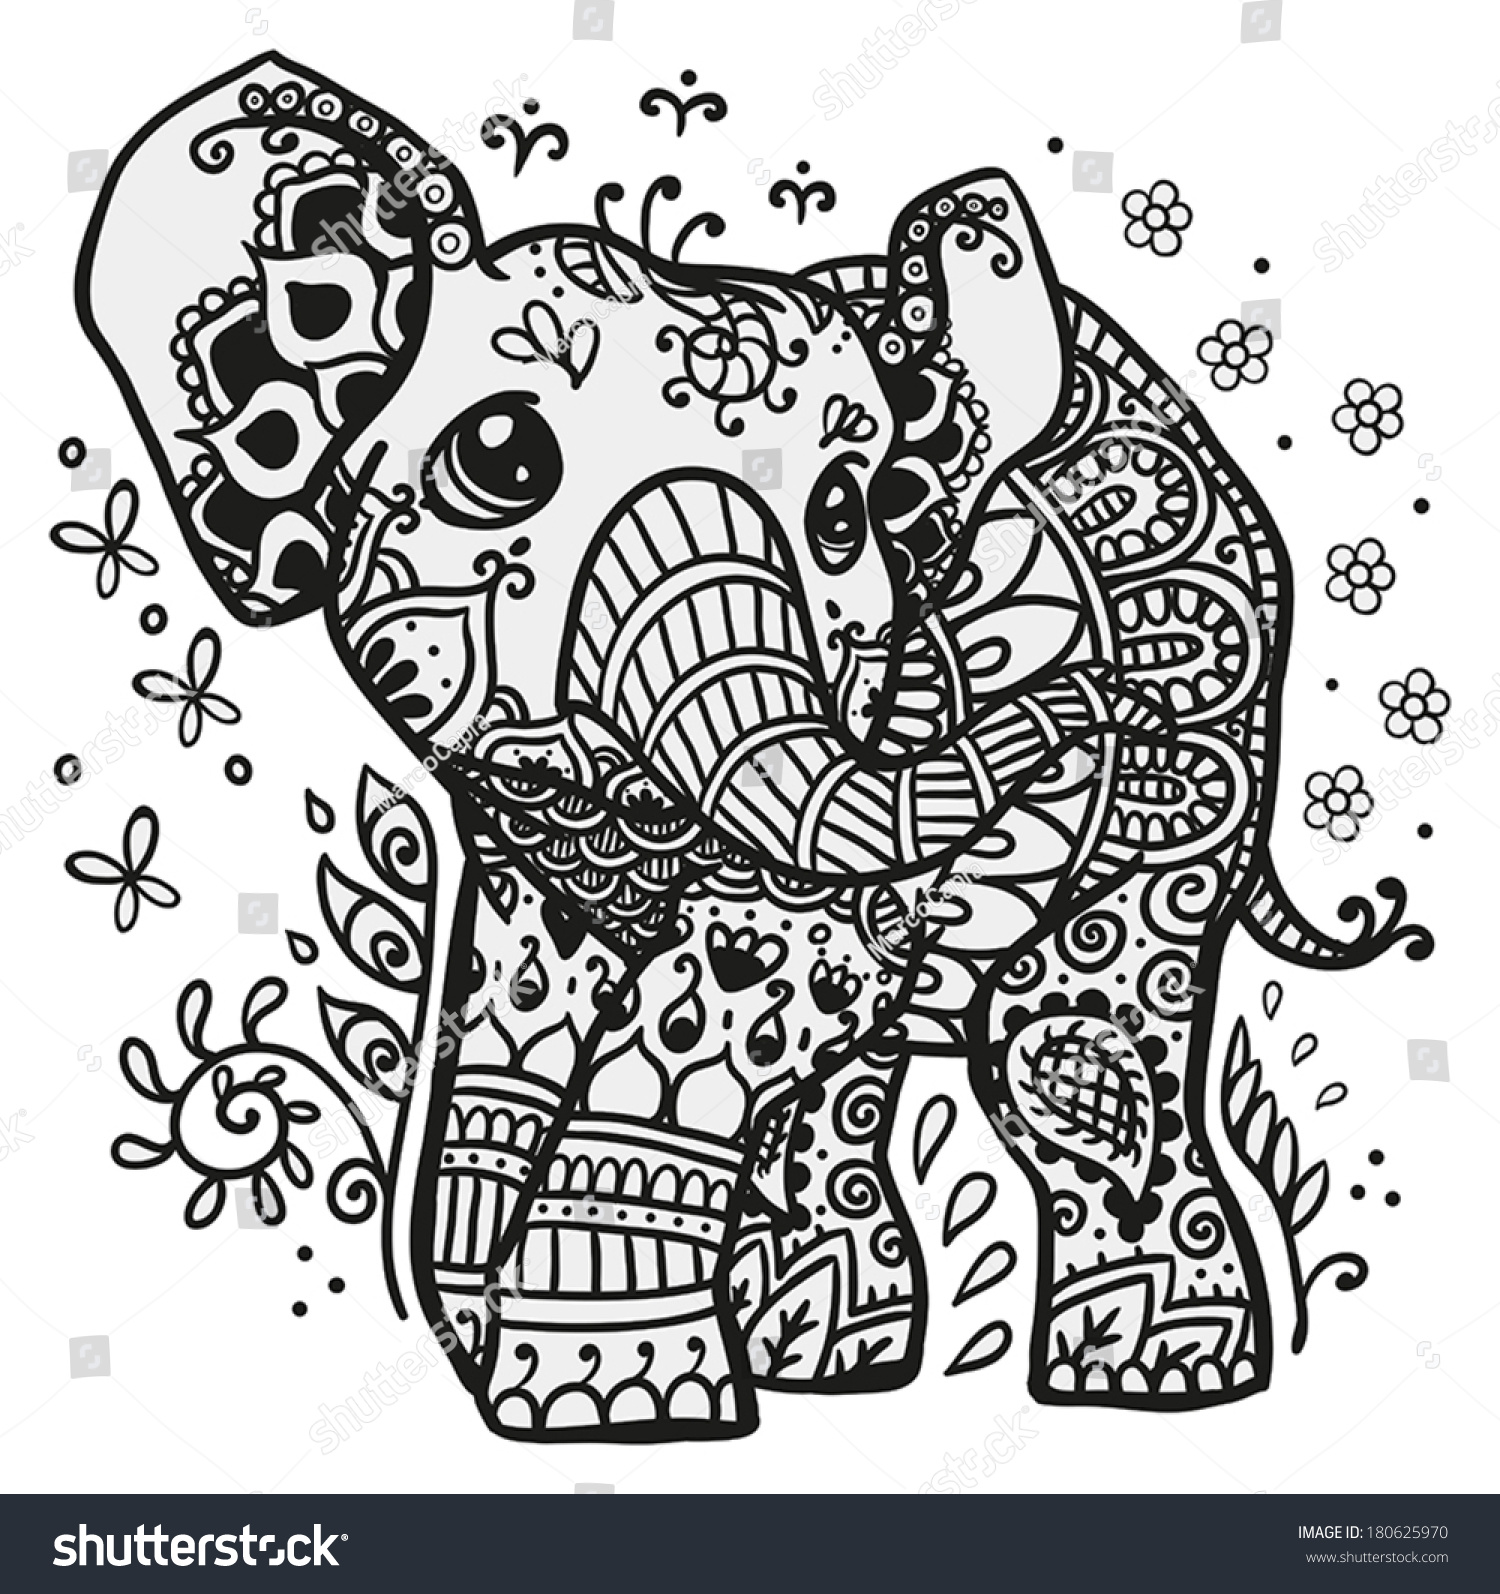 Black And White Vector Illustration Of A Baby Elephant With Mandala ...